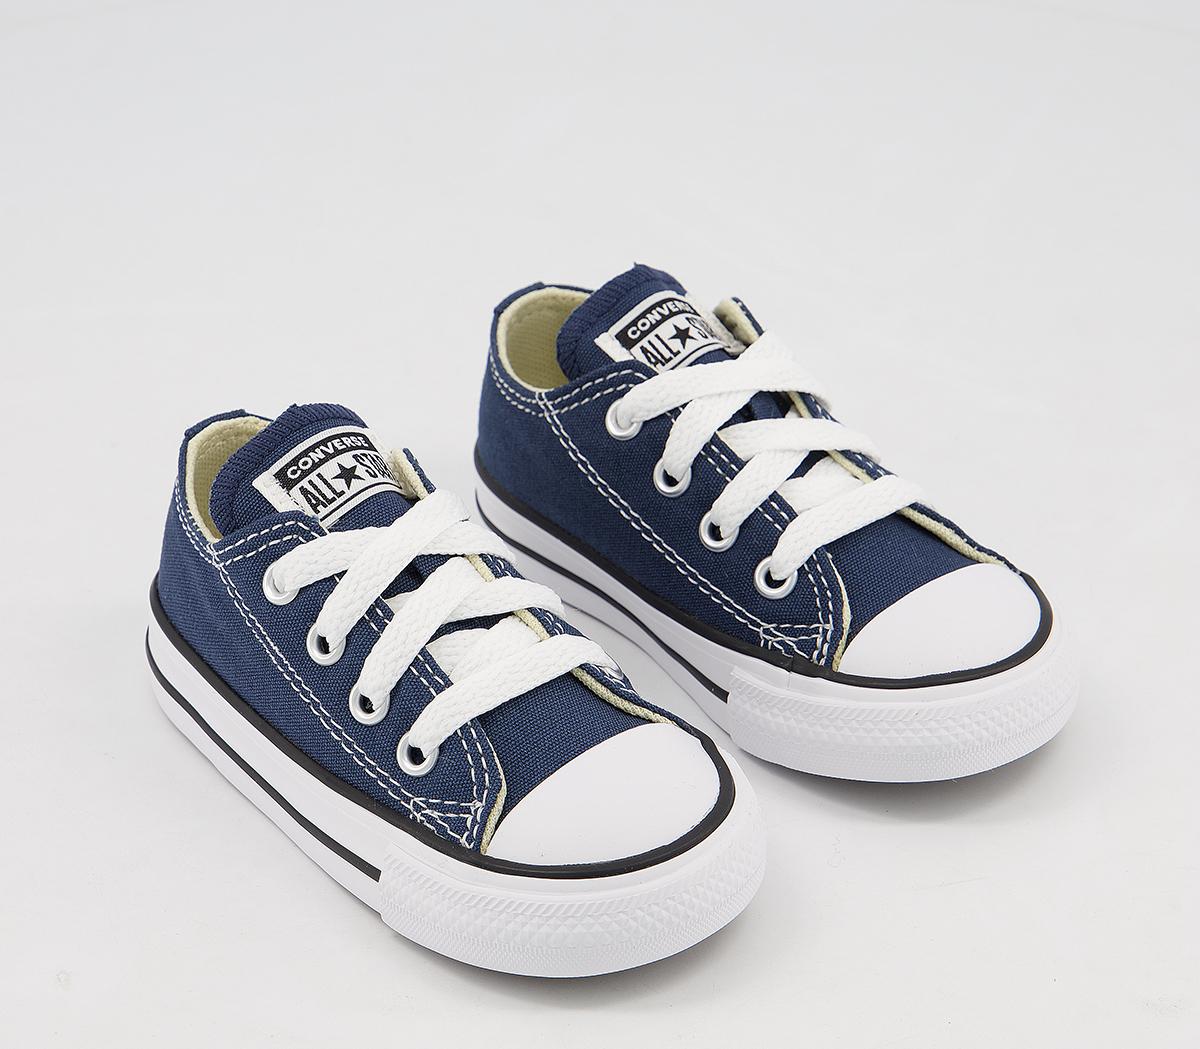 Kids Converse Baby Boys All Star Low Shoes In Navy Blue And White, 9 Infant